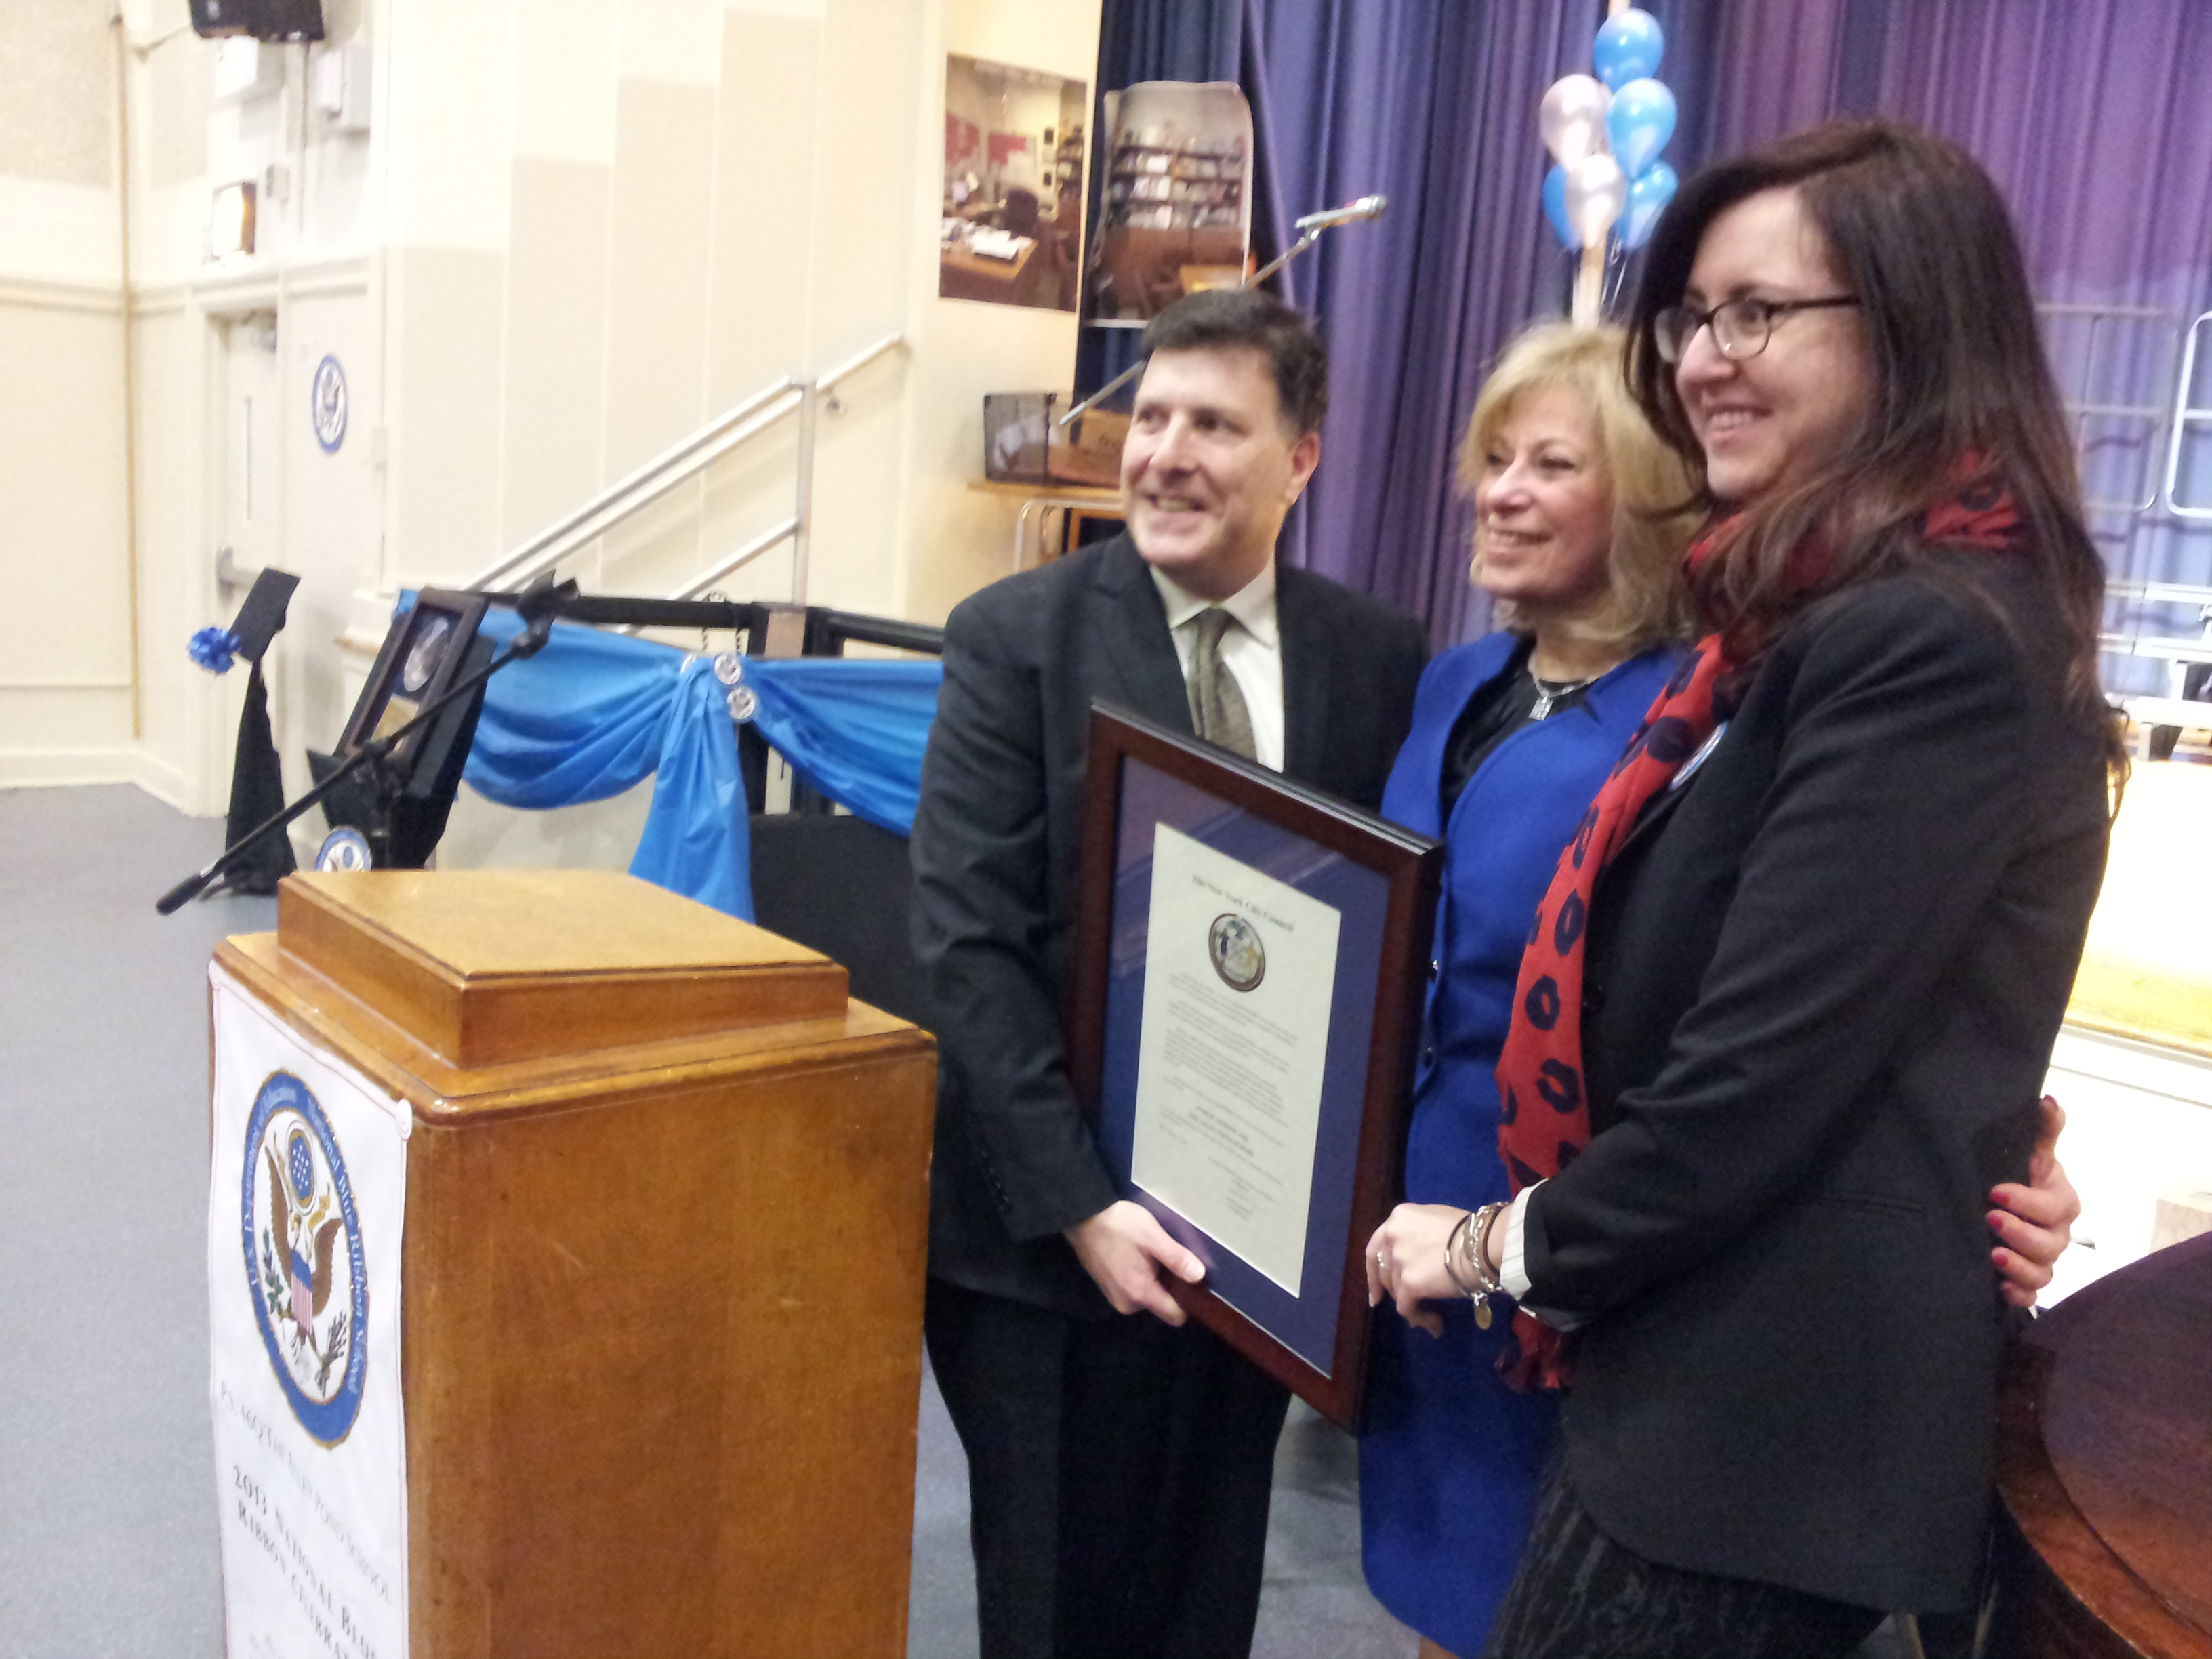 Assemblywoman Nily Rozic and Council Member Mark Weprin congratulated Principal Marsha Goldberg and P.S. 46 in Oakland Gardens for receiving the Blue Ribbon Award.